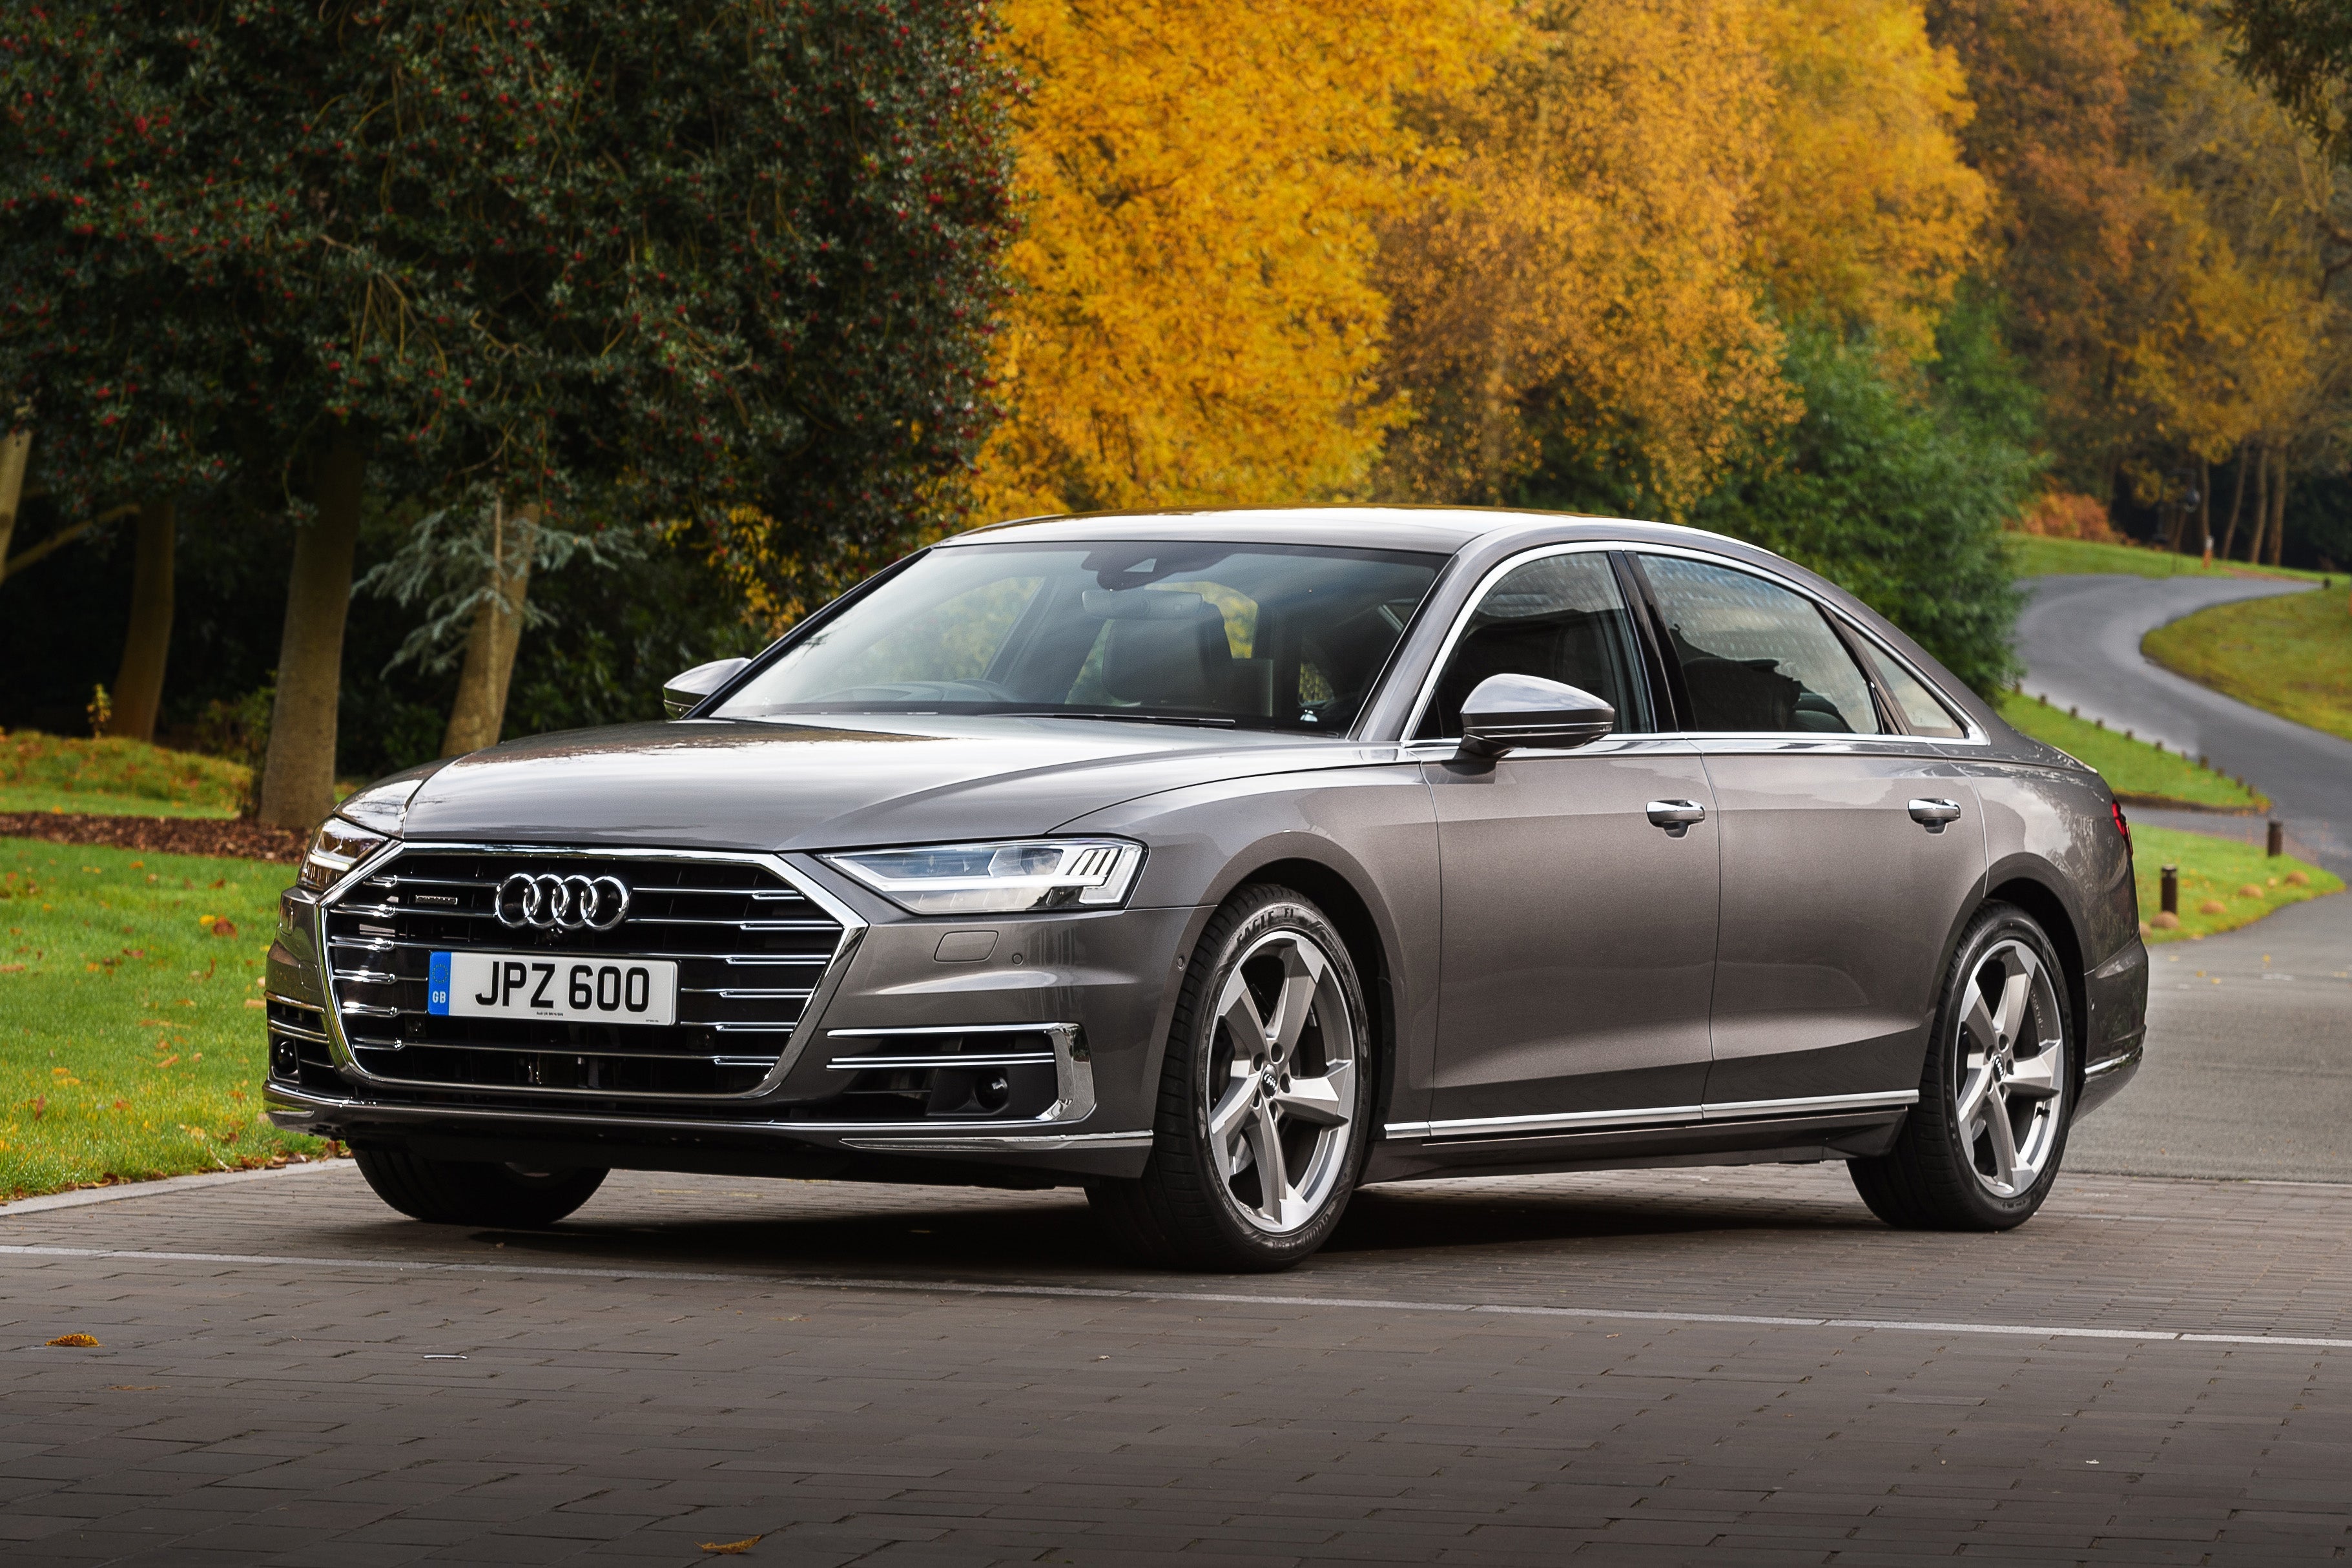 The new Audi A8 is the future of luxury